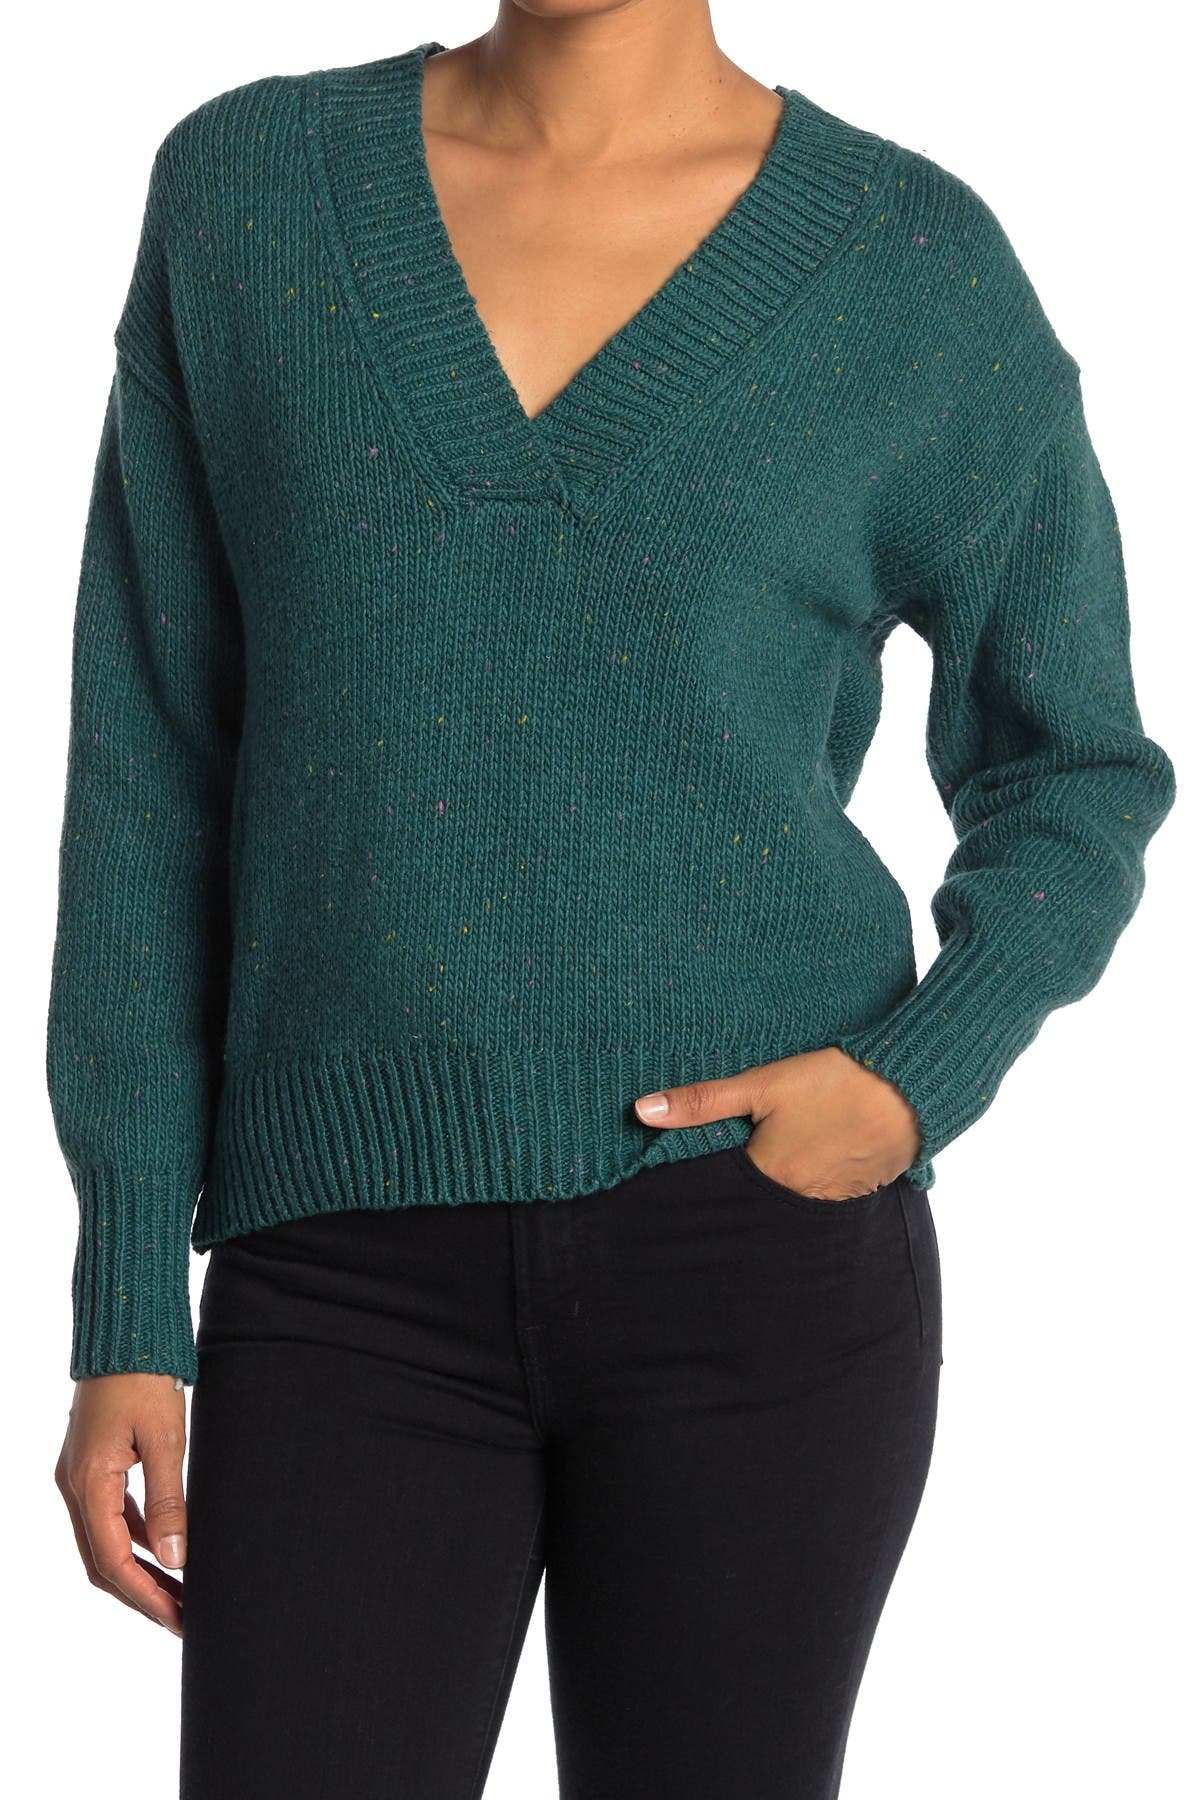 Abound Weekend V-neck Flecked Pullover Sweater In Turquoise/aqua9